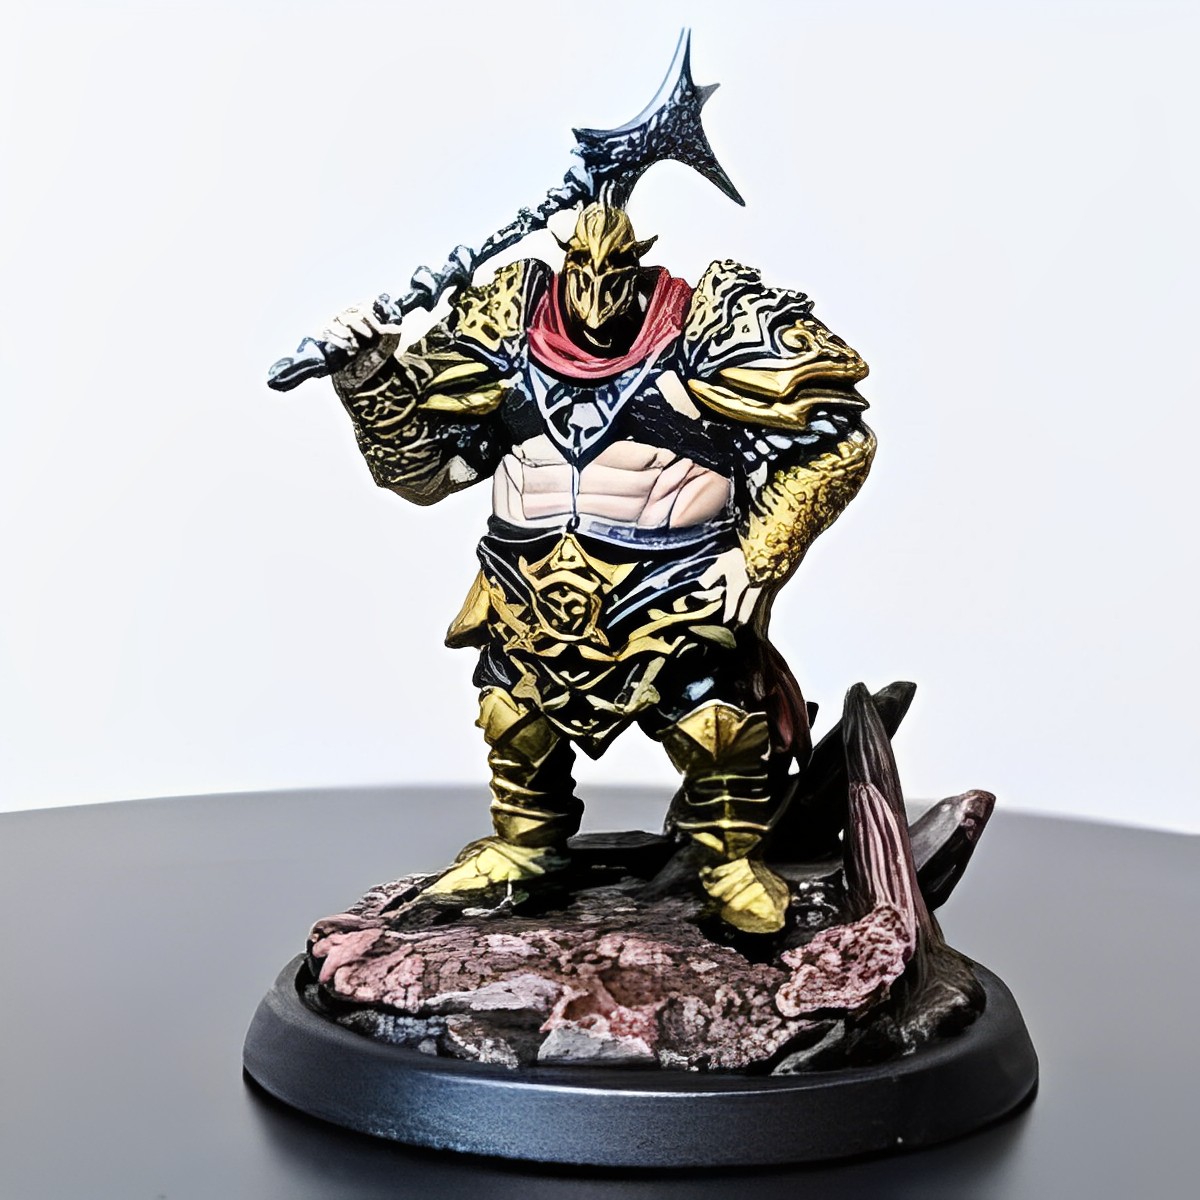 Get Started with Miniature Painting Guide: Step-by-Step Guide